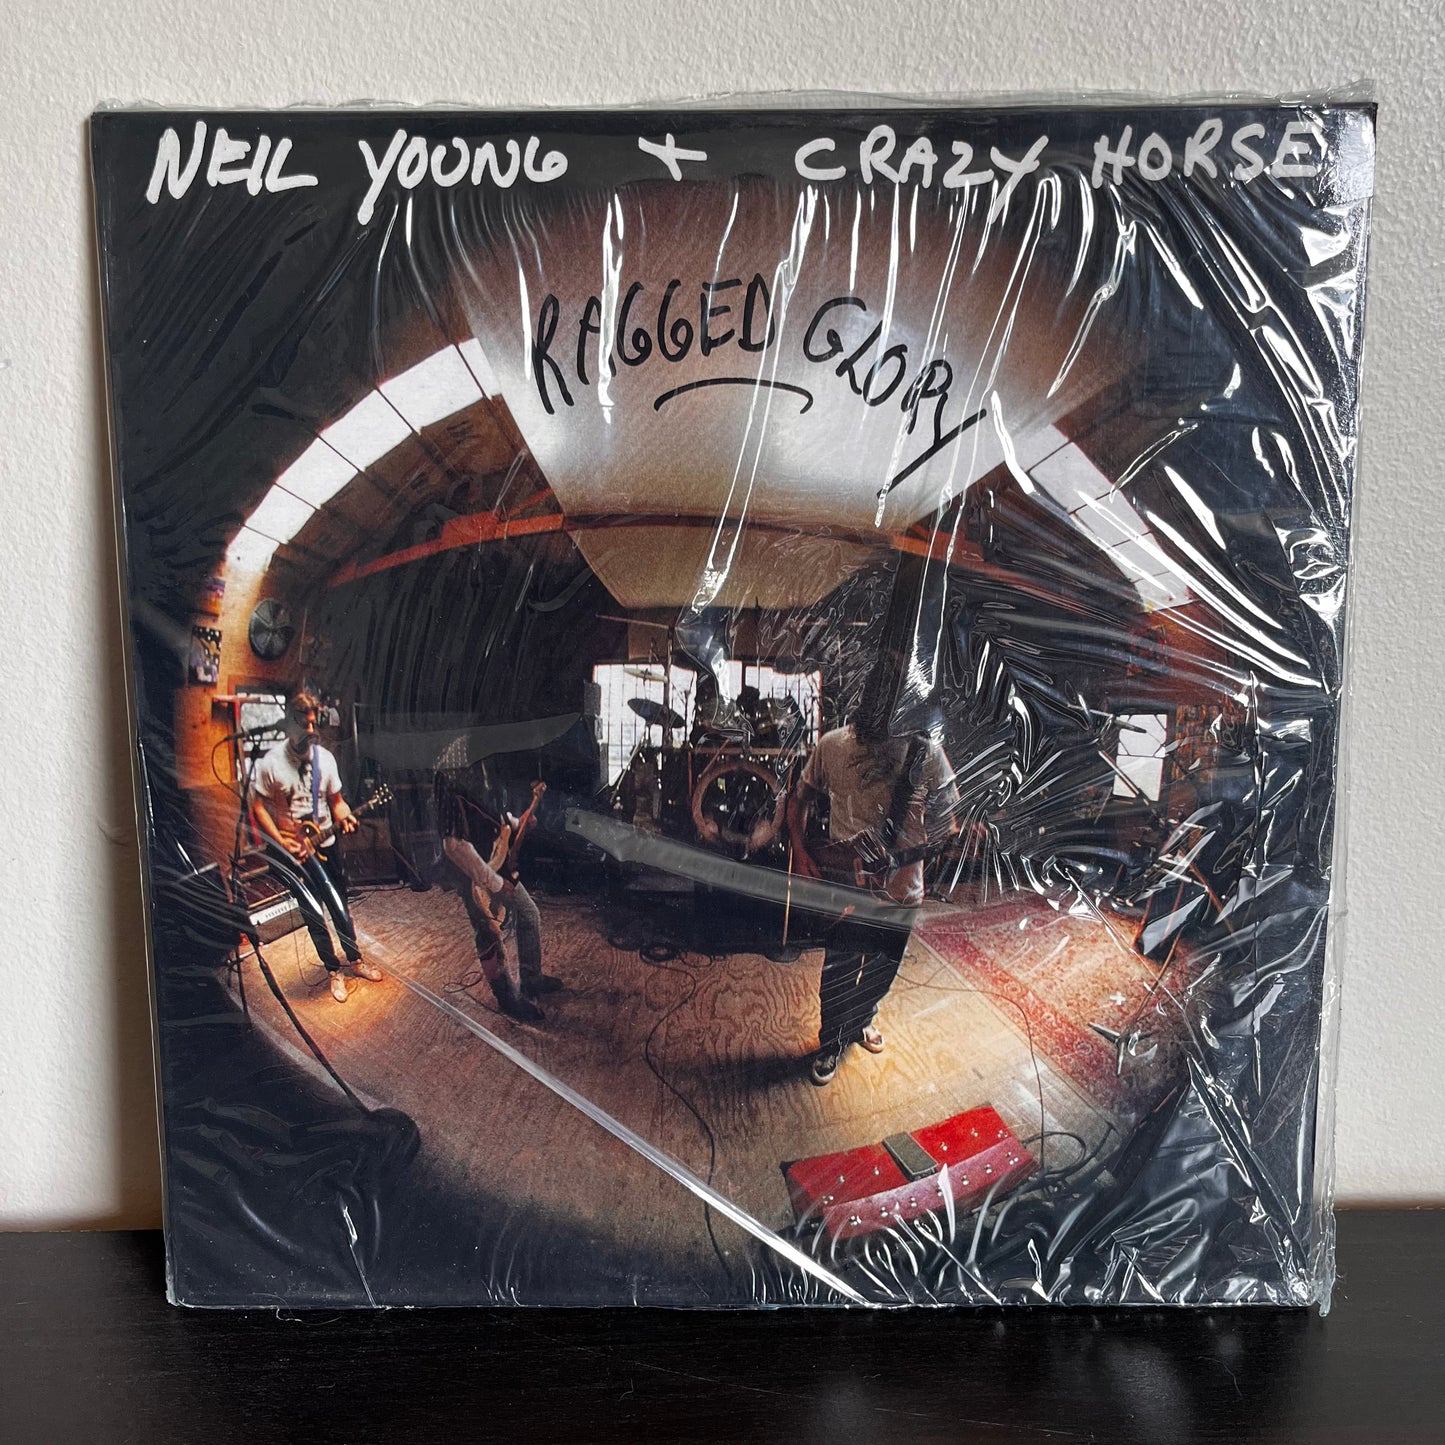 Neil Young + Crazy Horse Ragged Glory NM Vinyl 1990 US Press